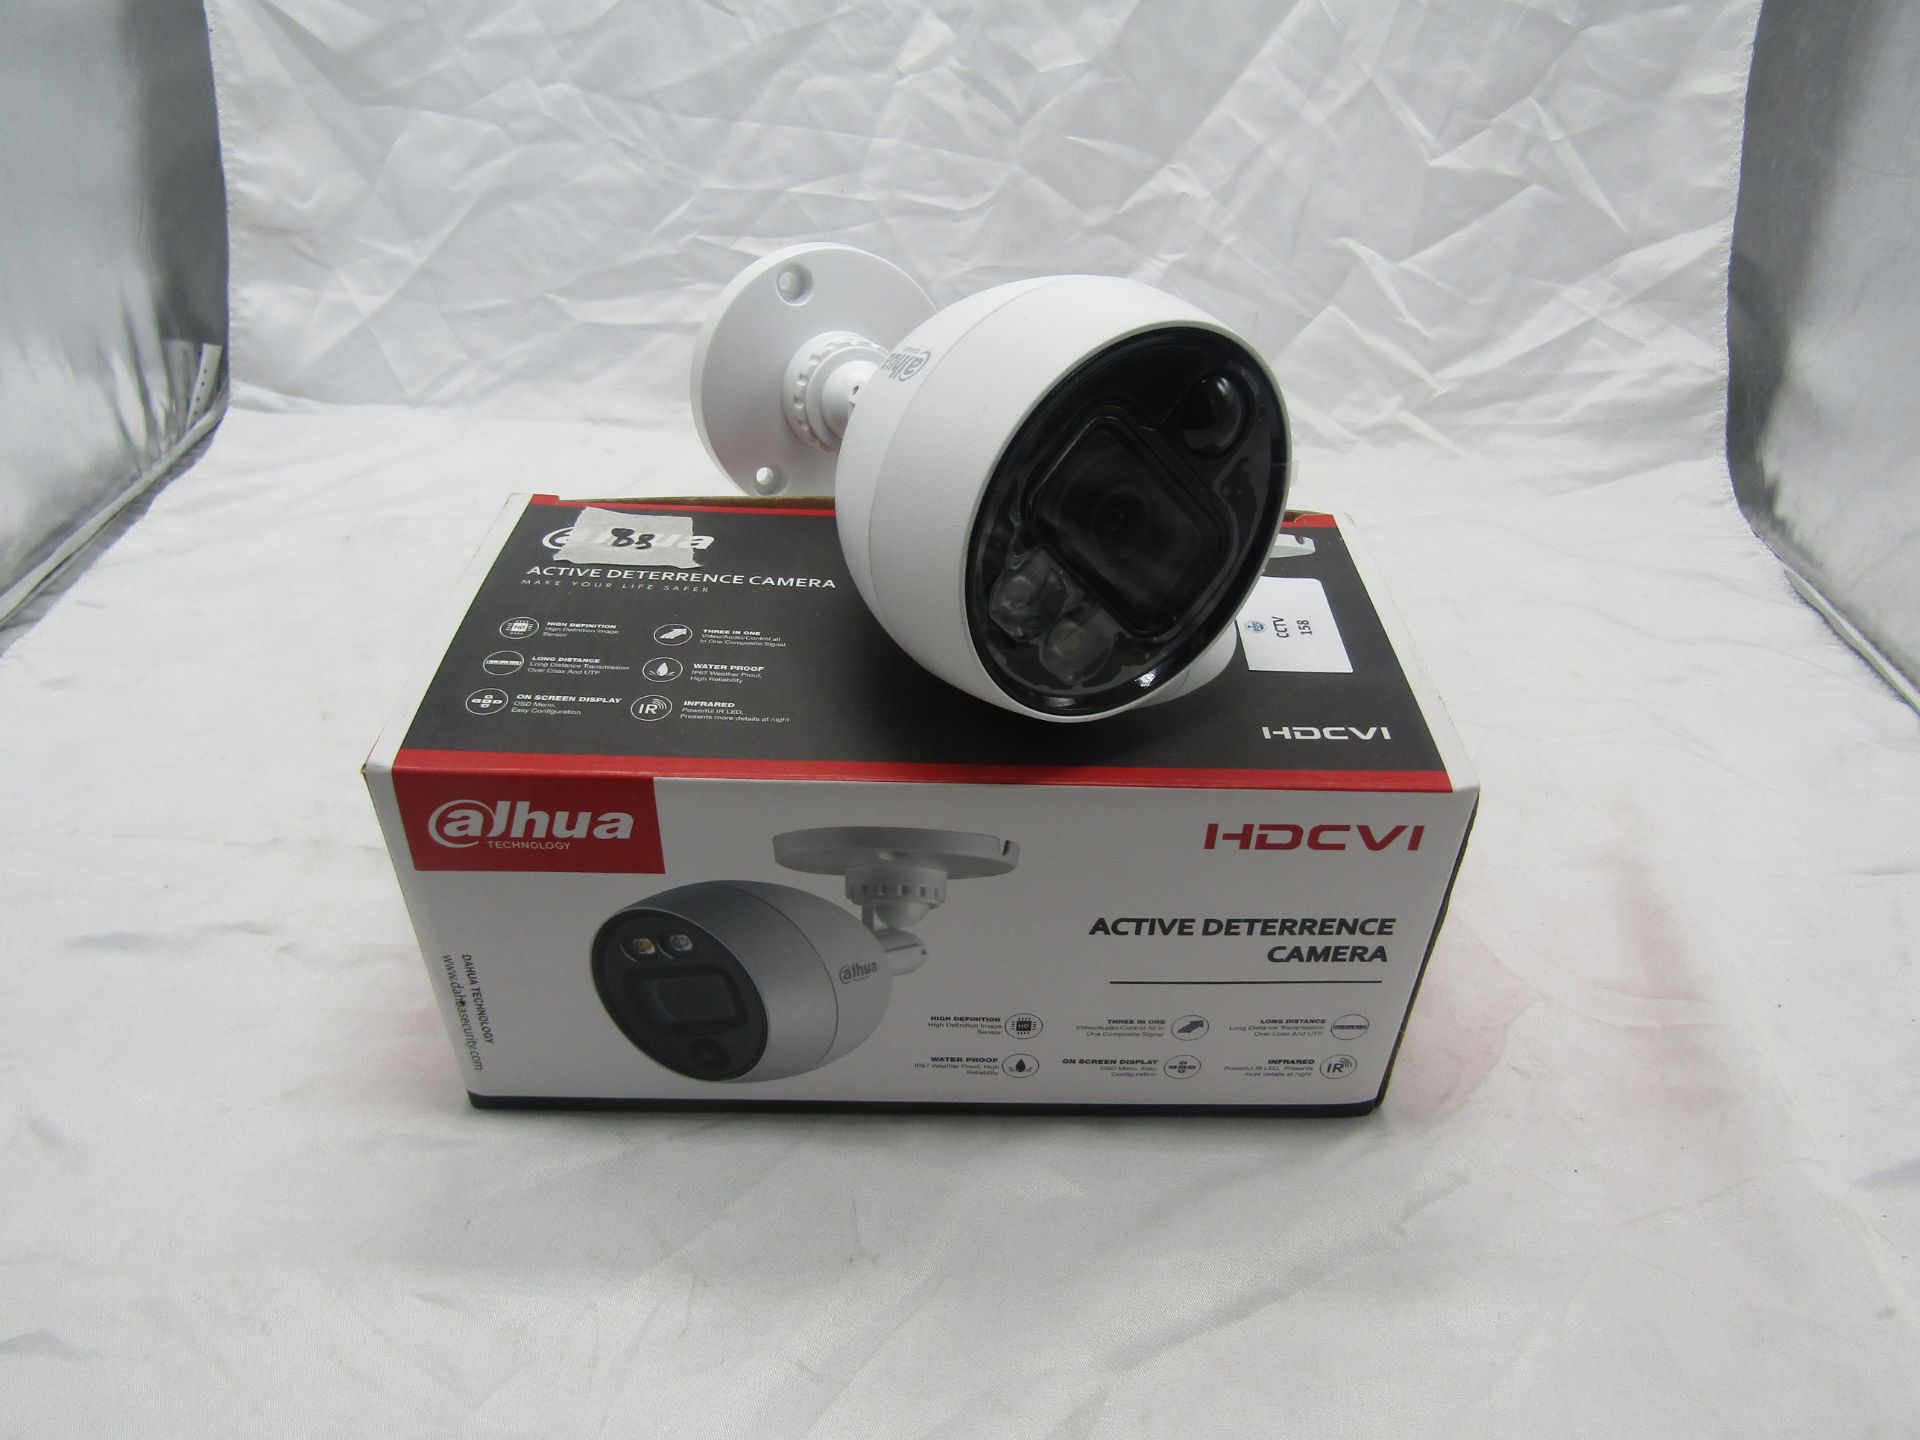 DAHUA VISION TECHNOLOGY Product: HDCVI CAMERA Model:DH-HAC-ME1200BP-LED PAL/20m/2.8mm/S4 Weight:0.